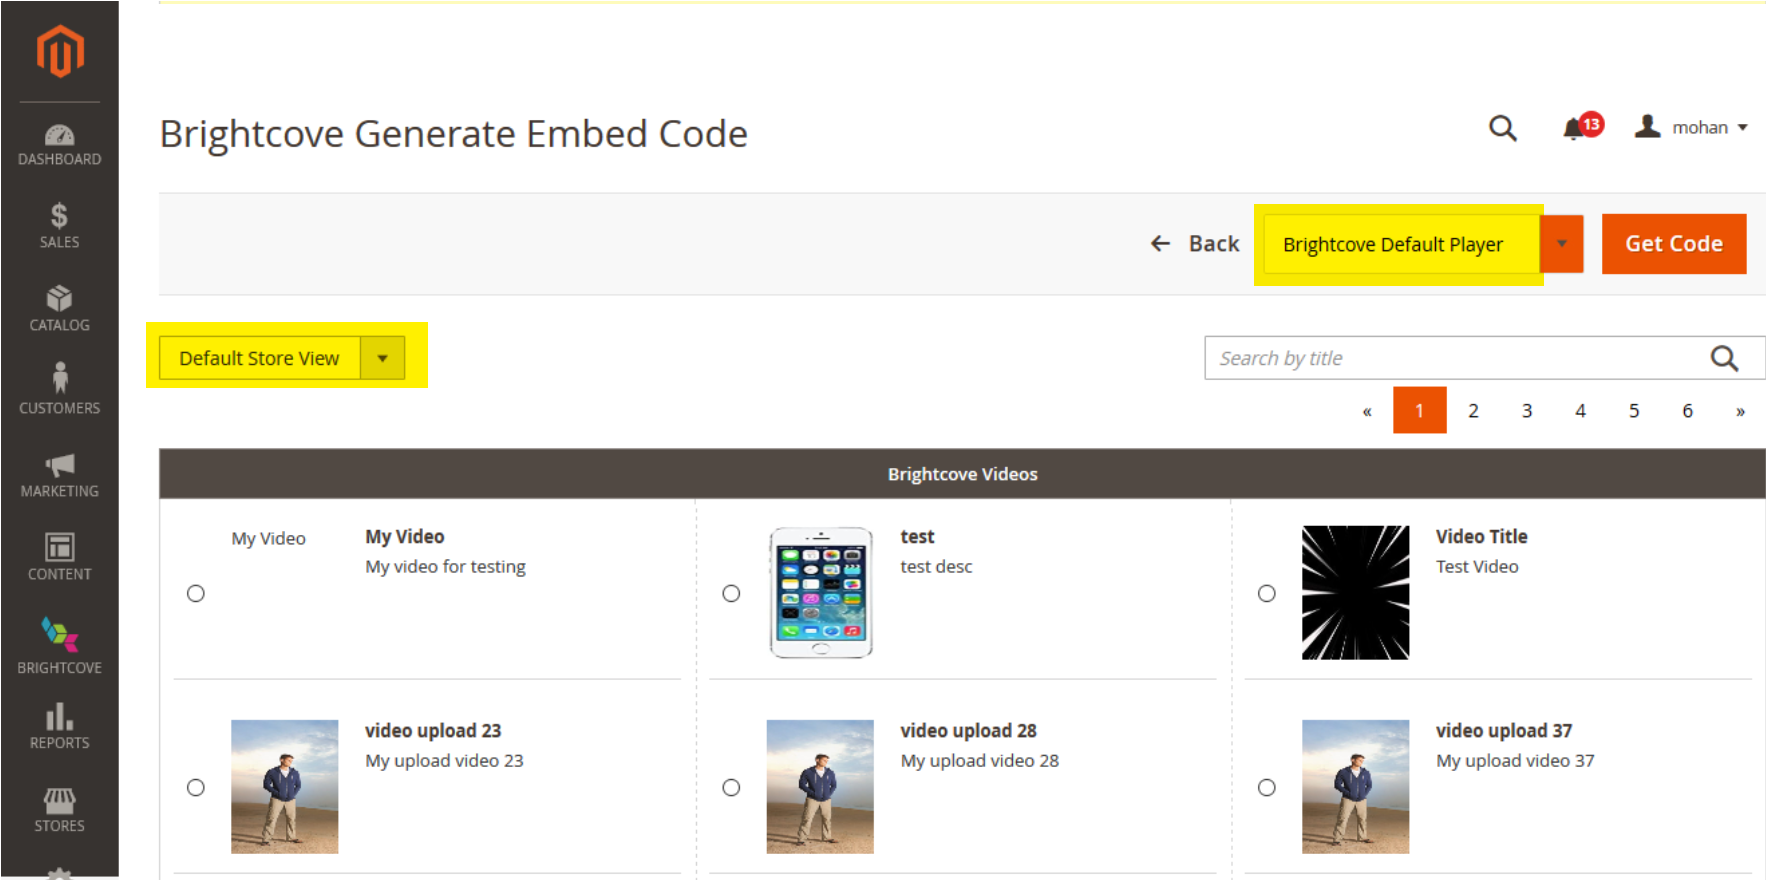 Generate Embed Code Page